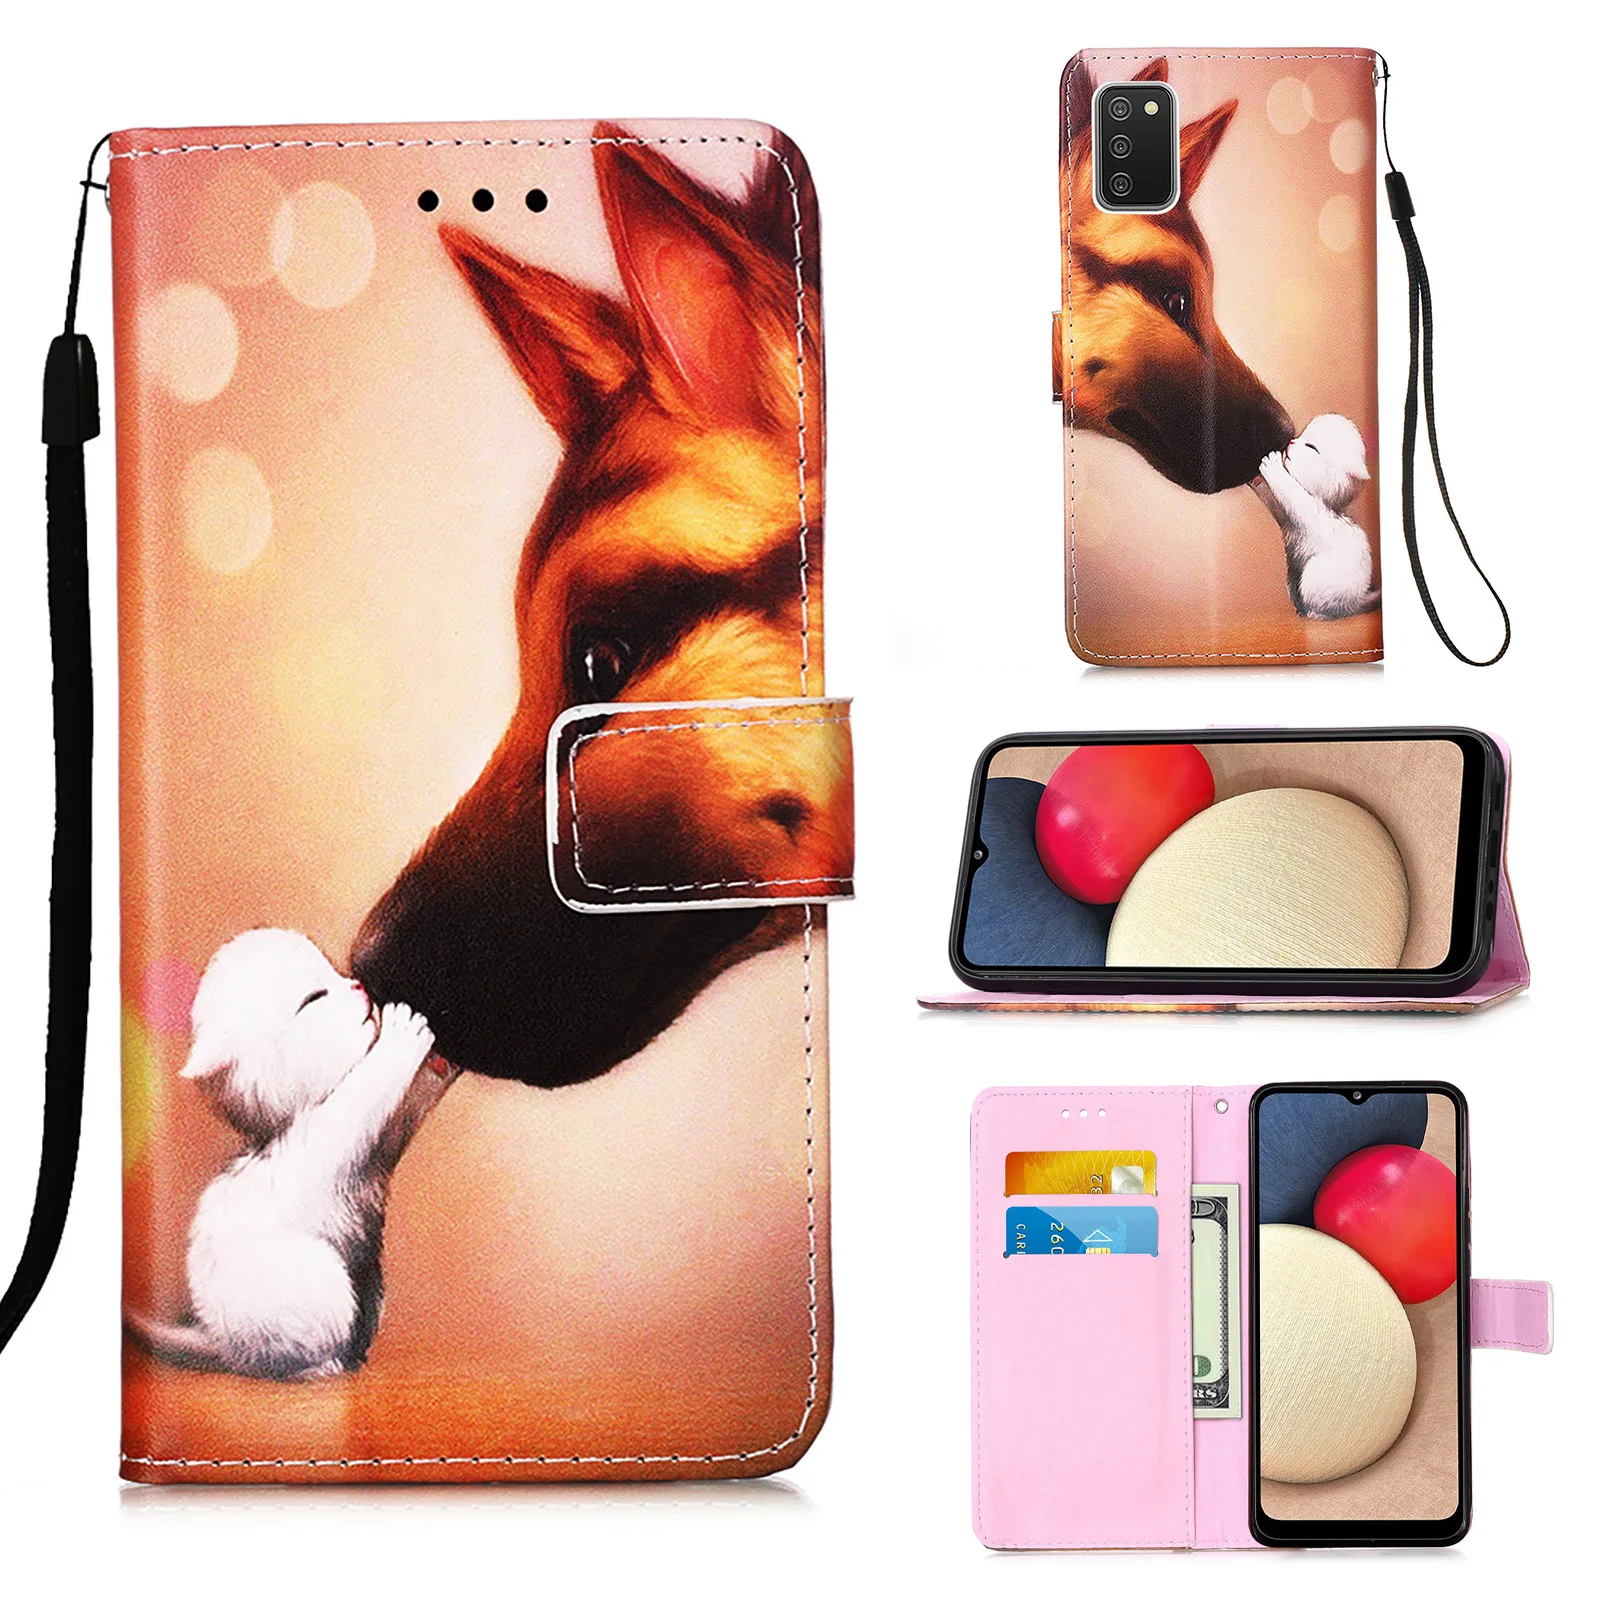 

Animal Panda Donkey Fashion Flip Cover PU Leather Phone Case For Galaxy A02S Wallet Bag Stand Cases Capa